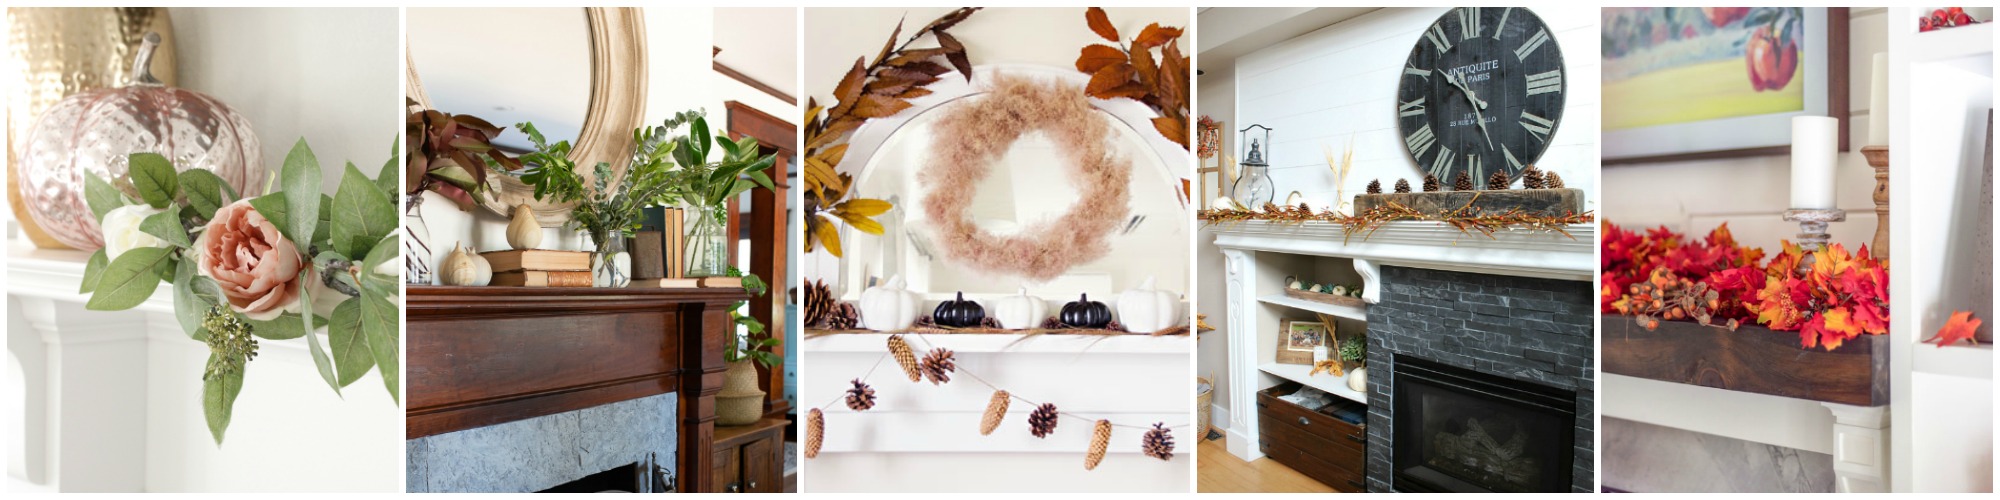 Wreaths and mirrors fall decor.